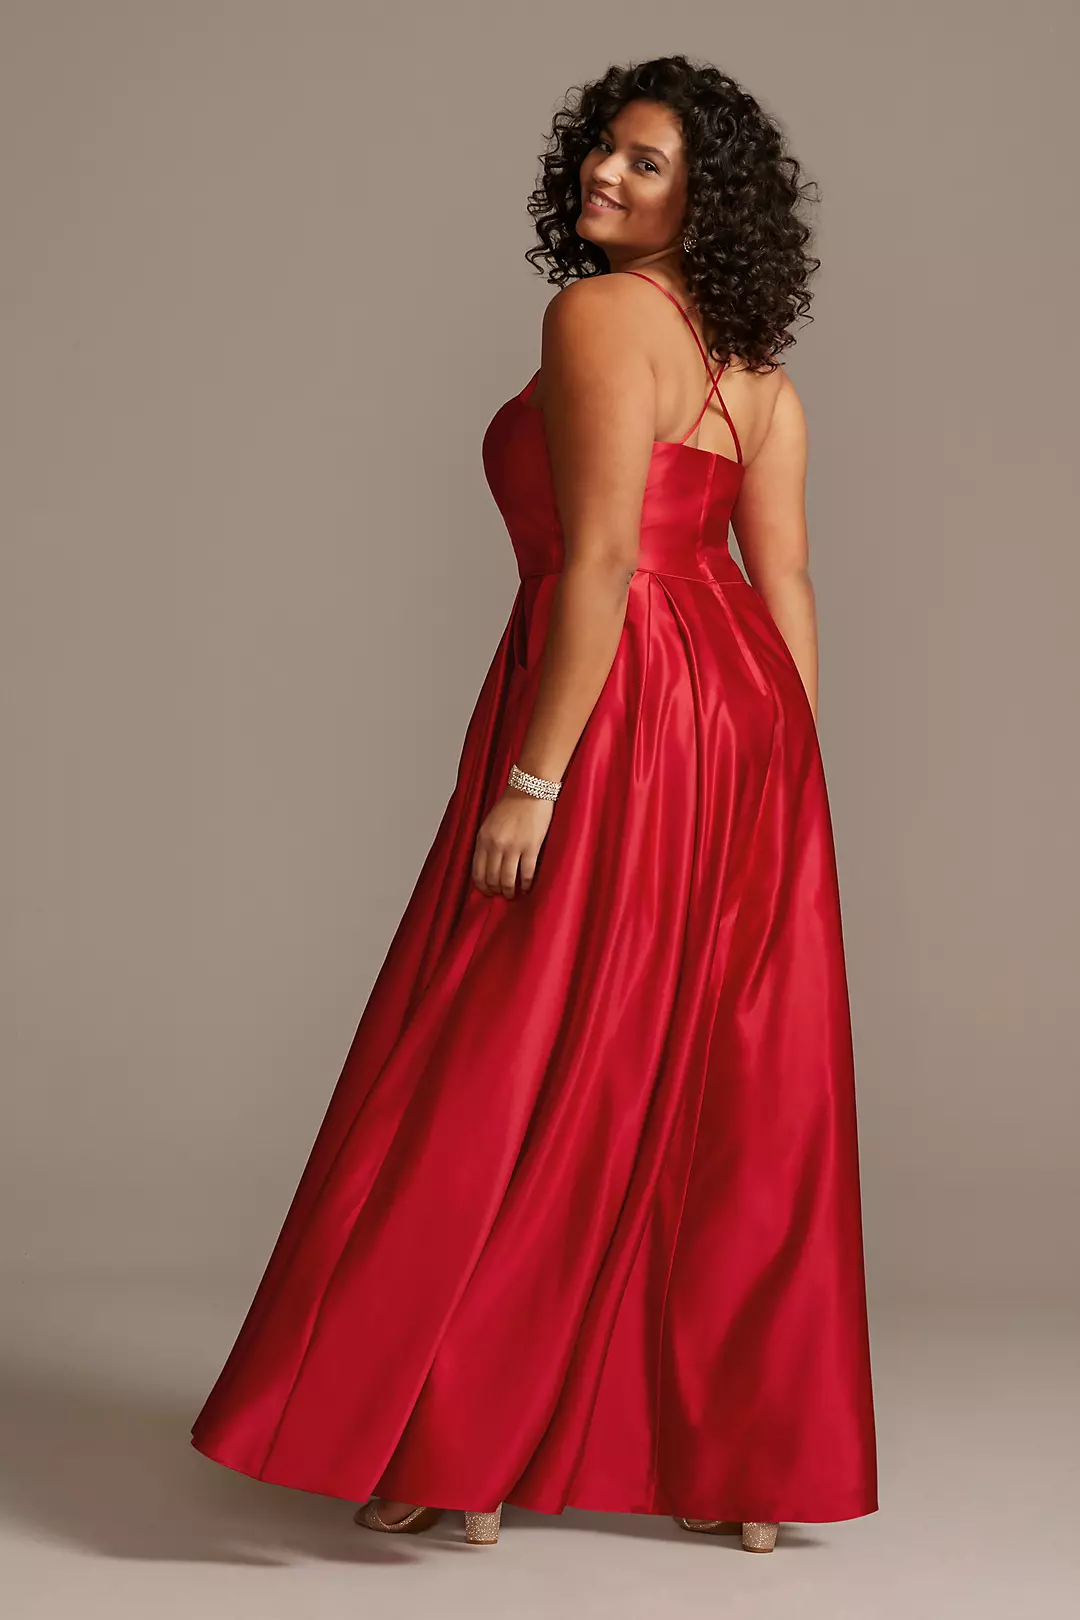 Satin Spaghetti Strap Ball Gown with Pockets Image 2